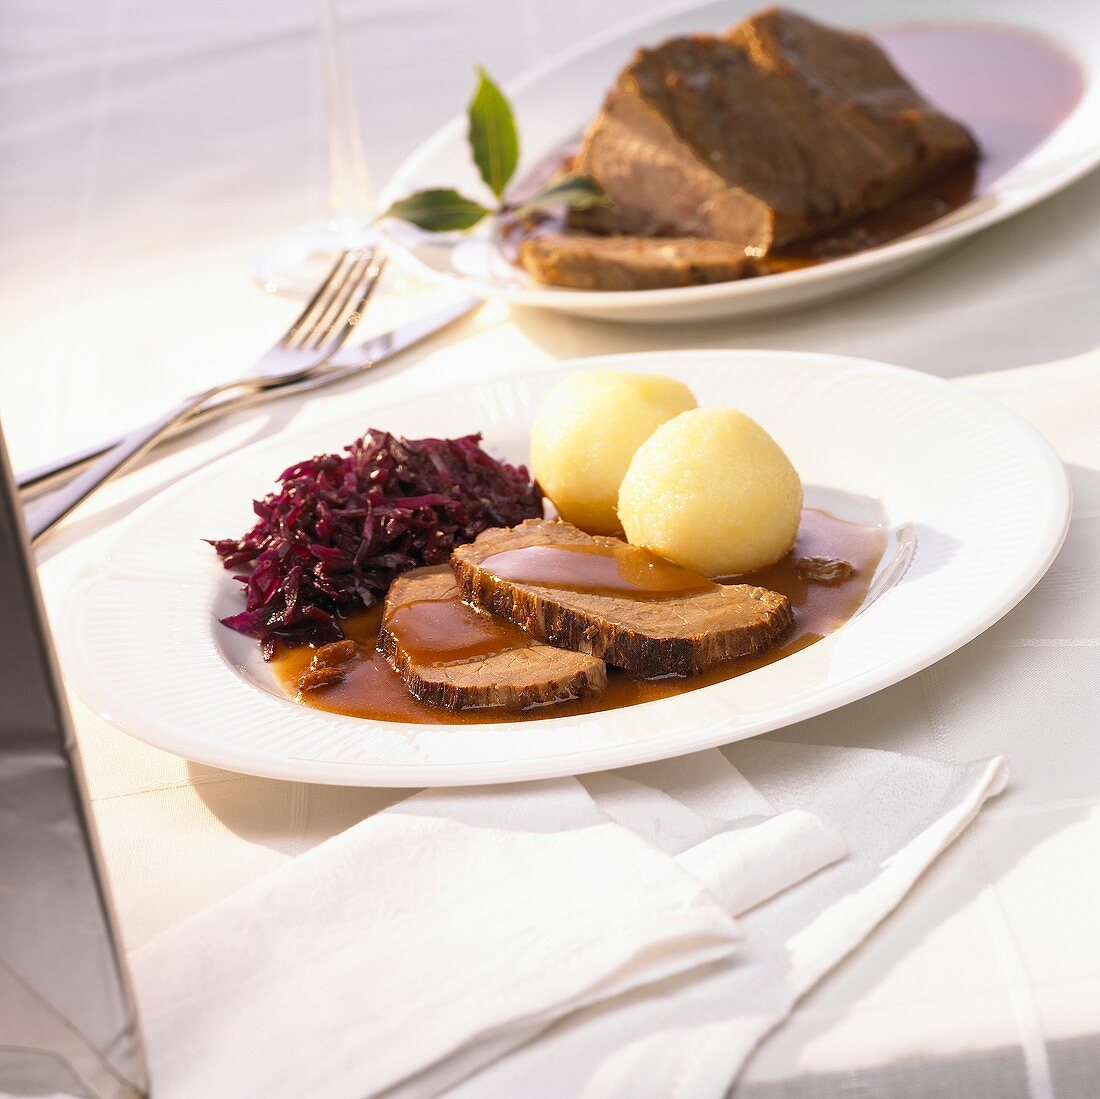 Rhineland Sauerbraten (braised beef in vinegar) with red cabbage and potato dumplings